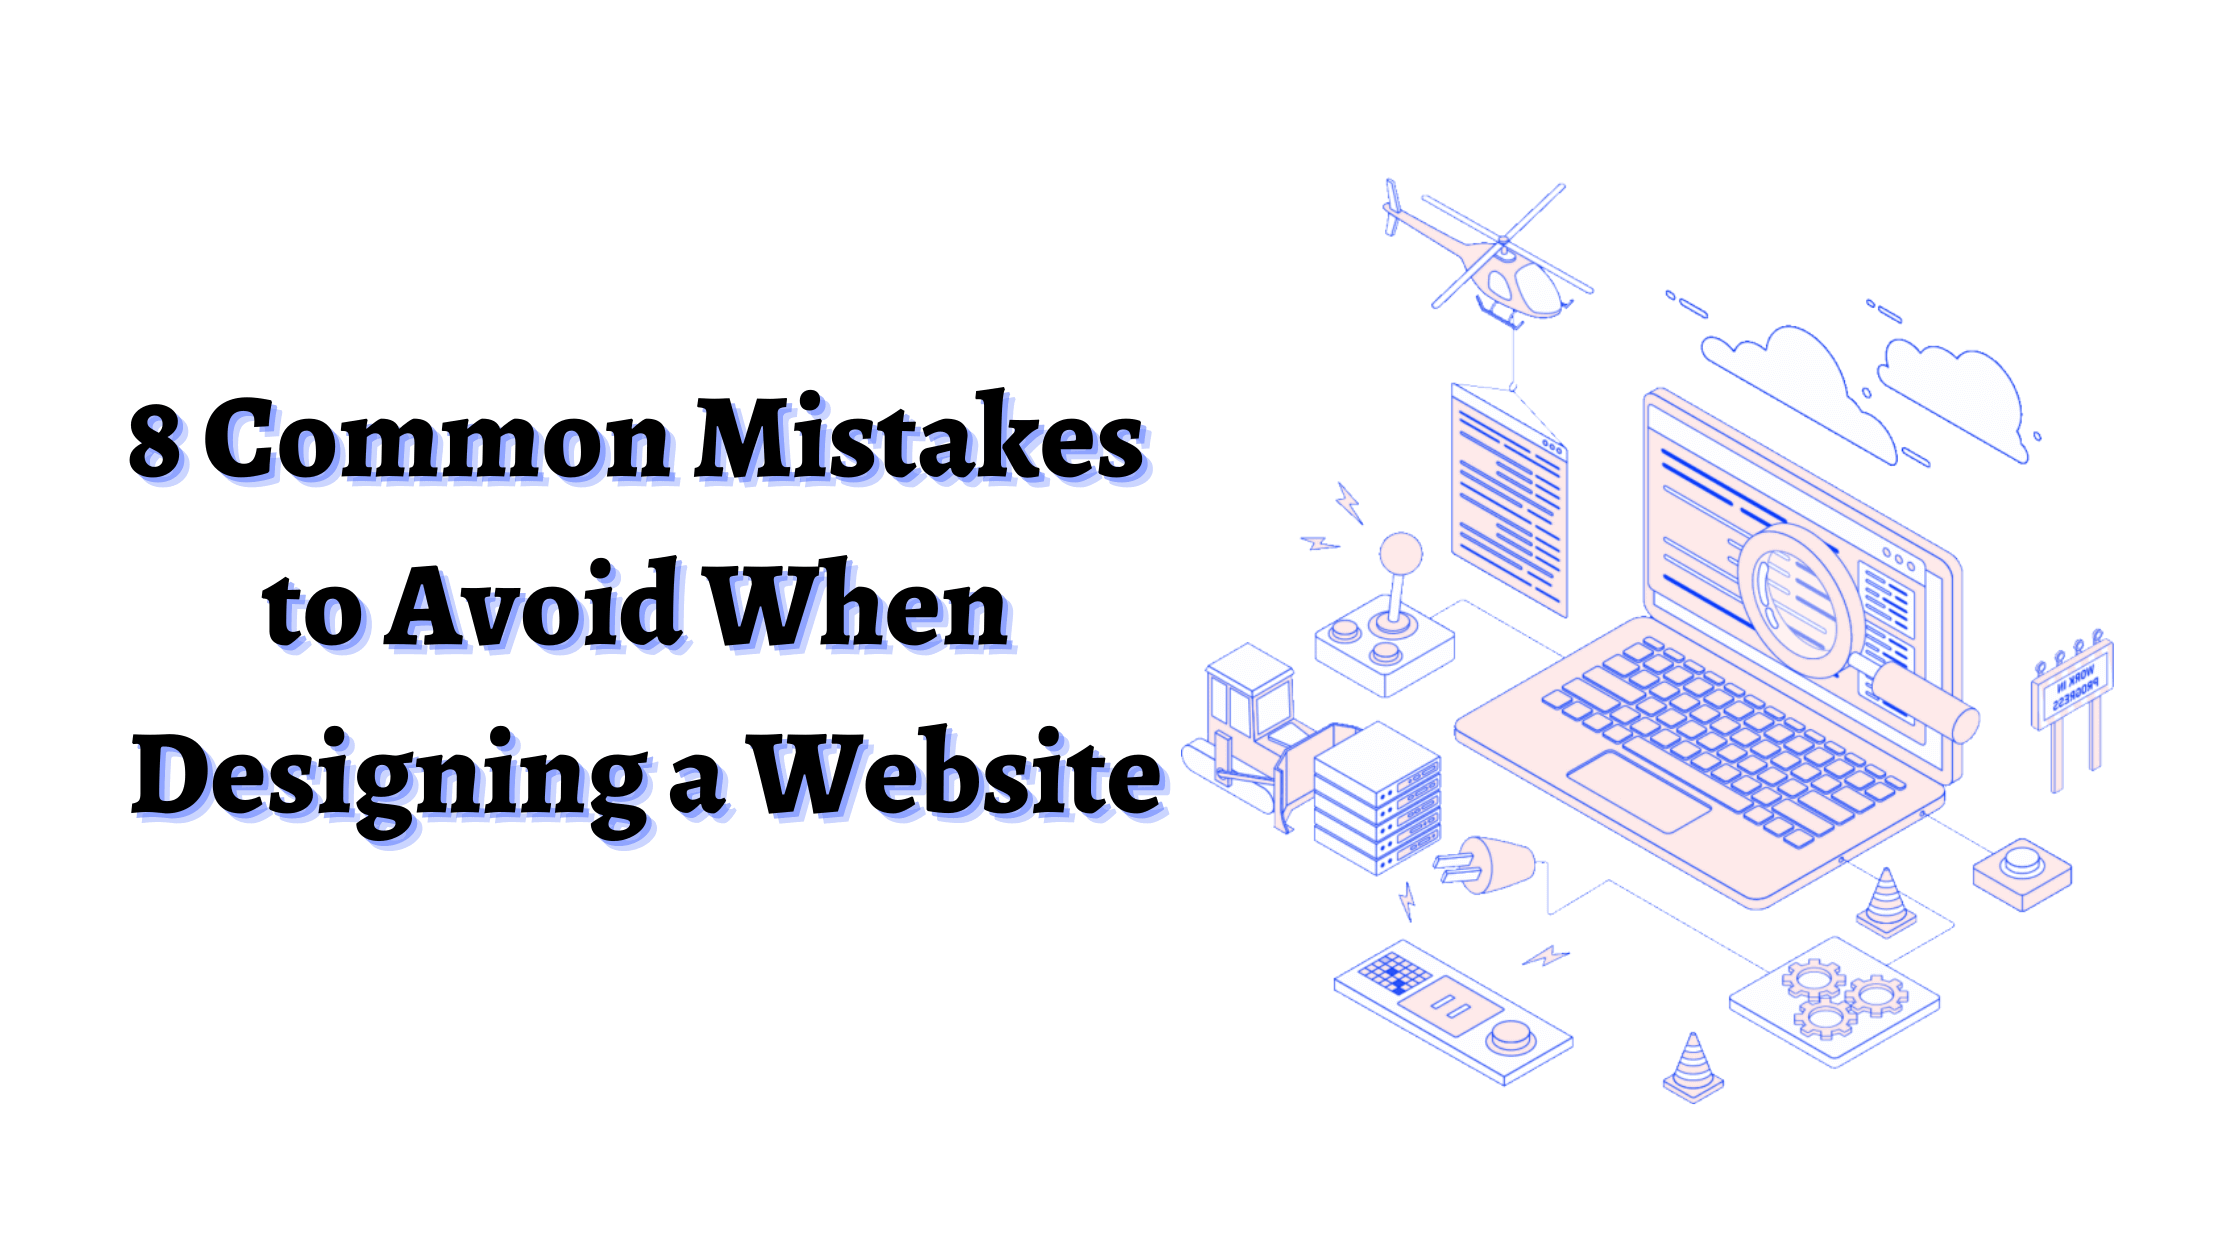 8 Common Mistakes to Avoid When Designing a Website